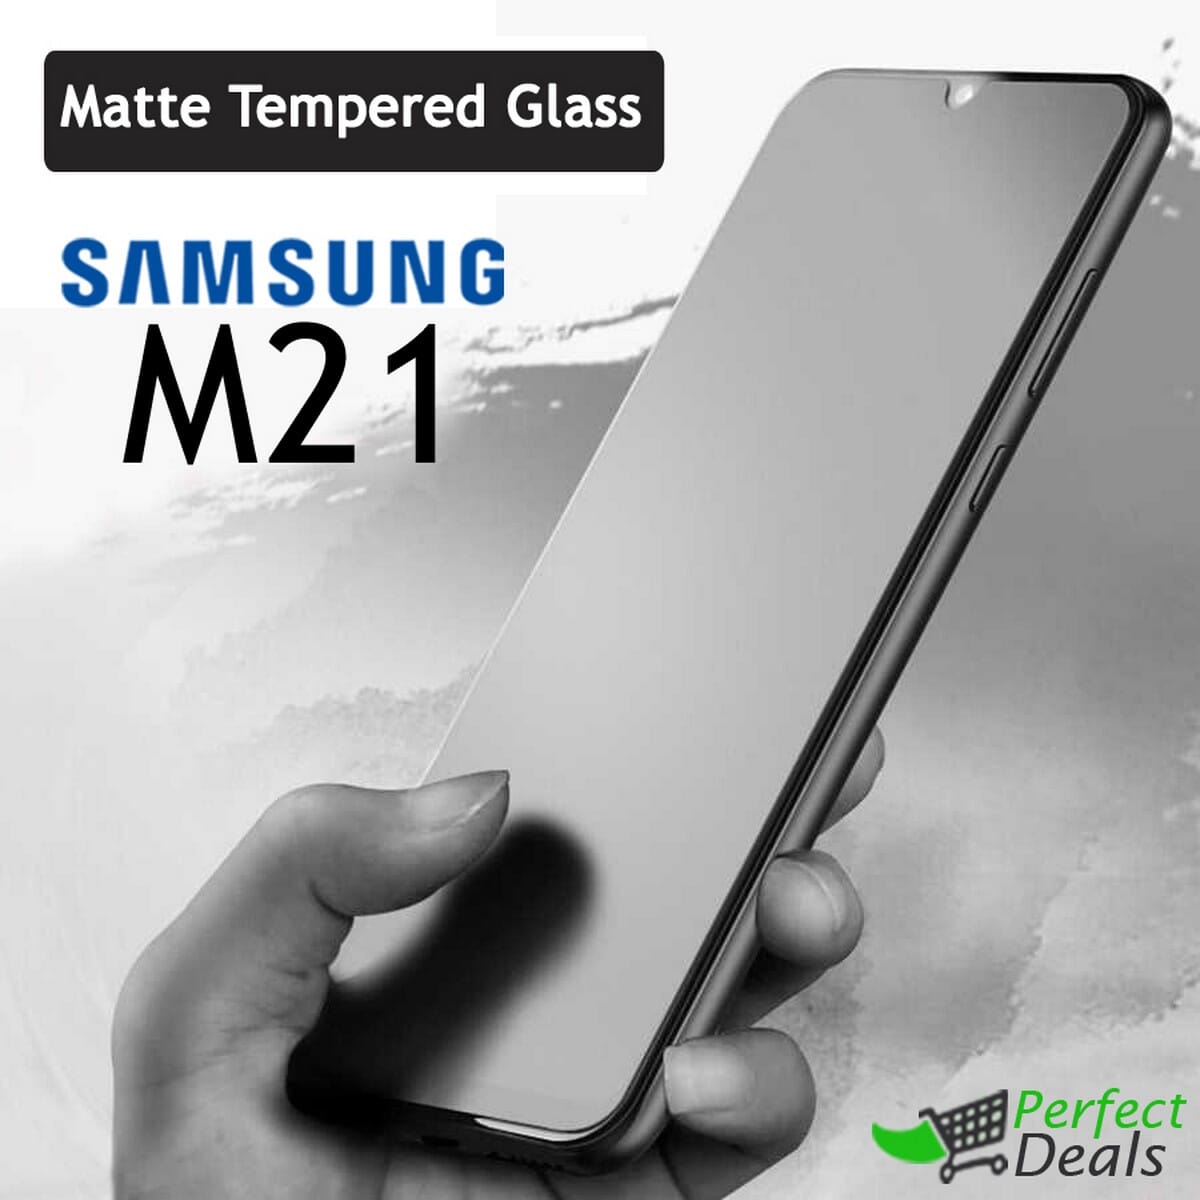 Matte Tempered Glass Screen Protector for Samsung Galaxy M21